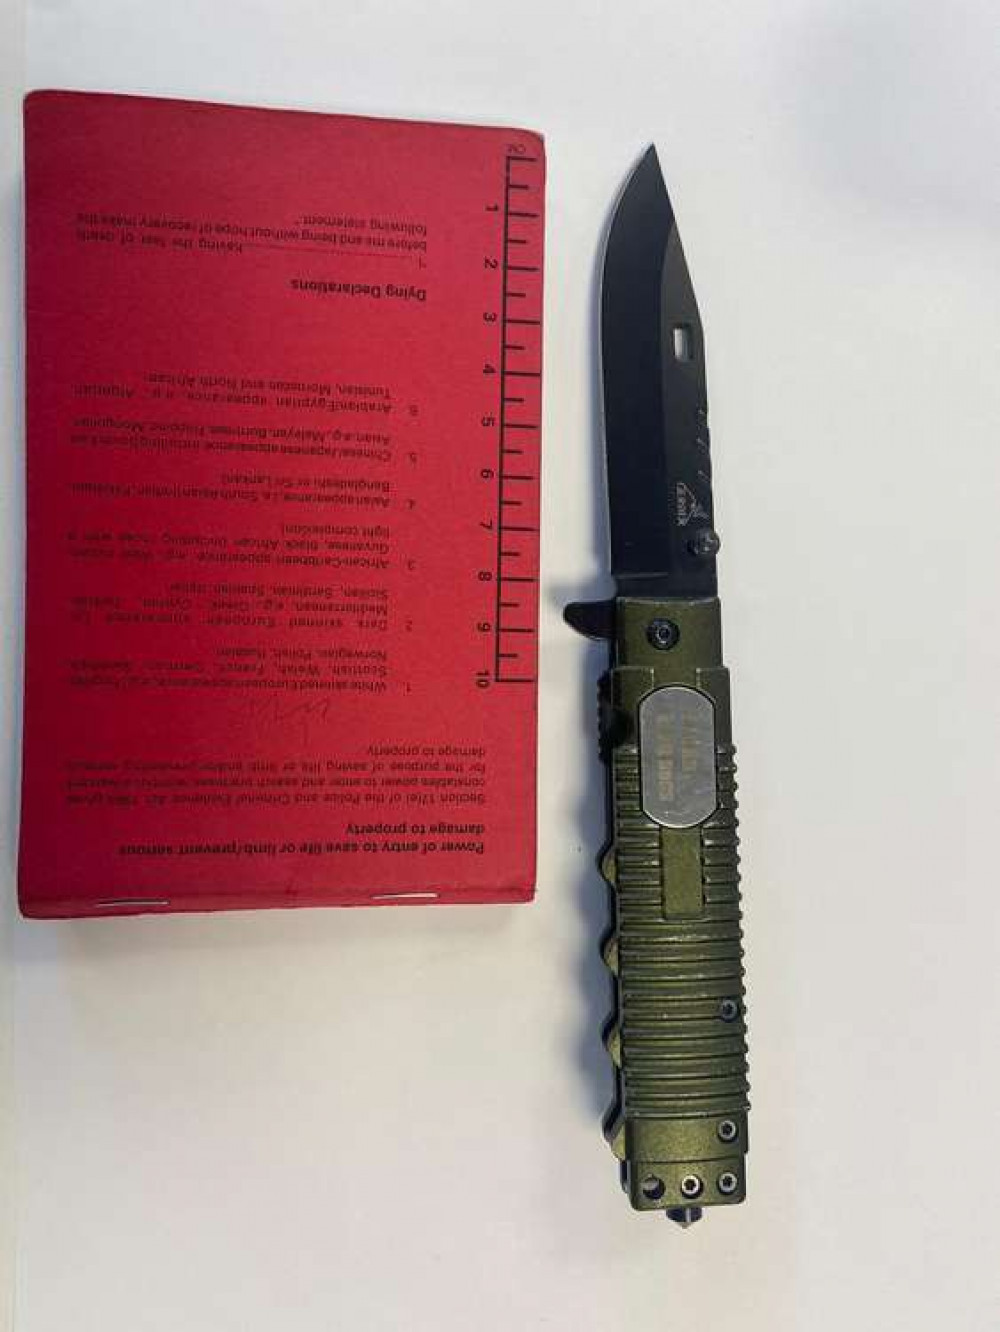 Kingston police confiscated the knife after carrying out a stop and search (Image: Kingston Police)